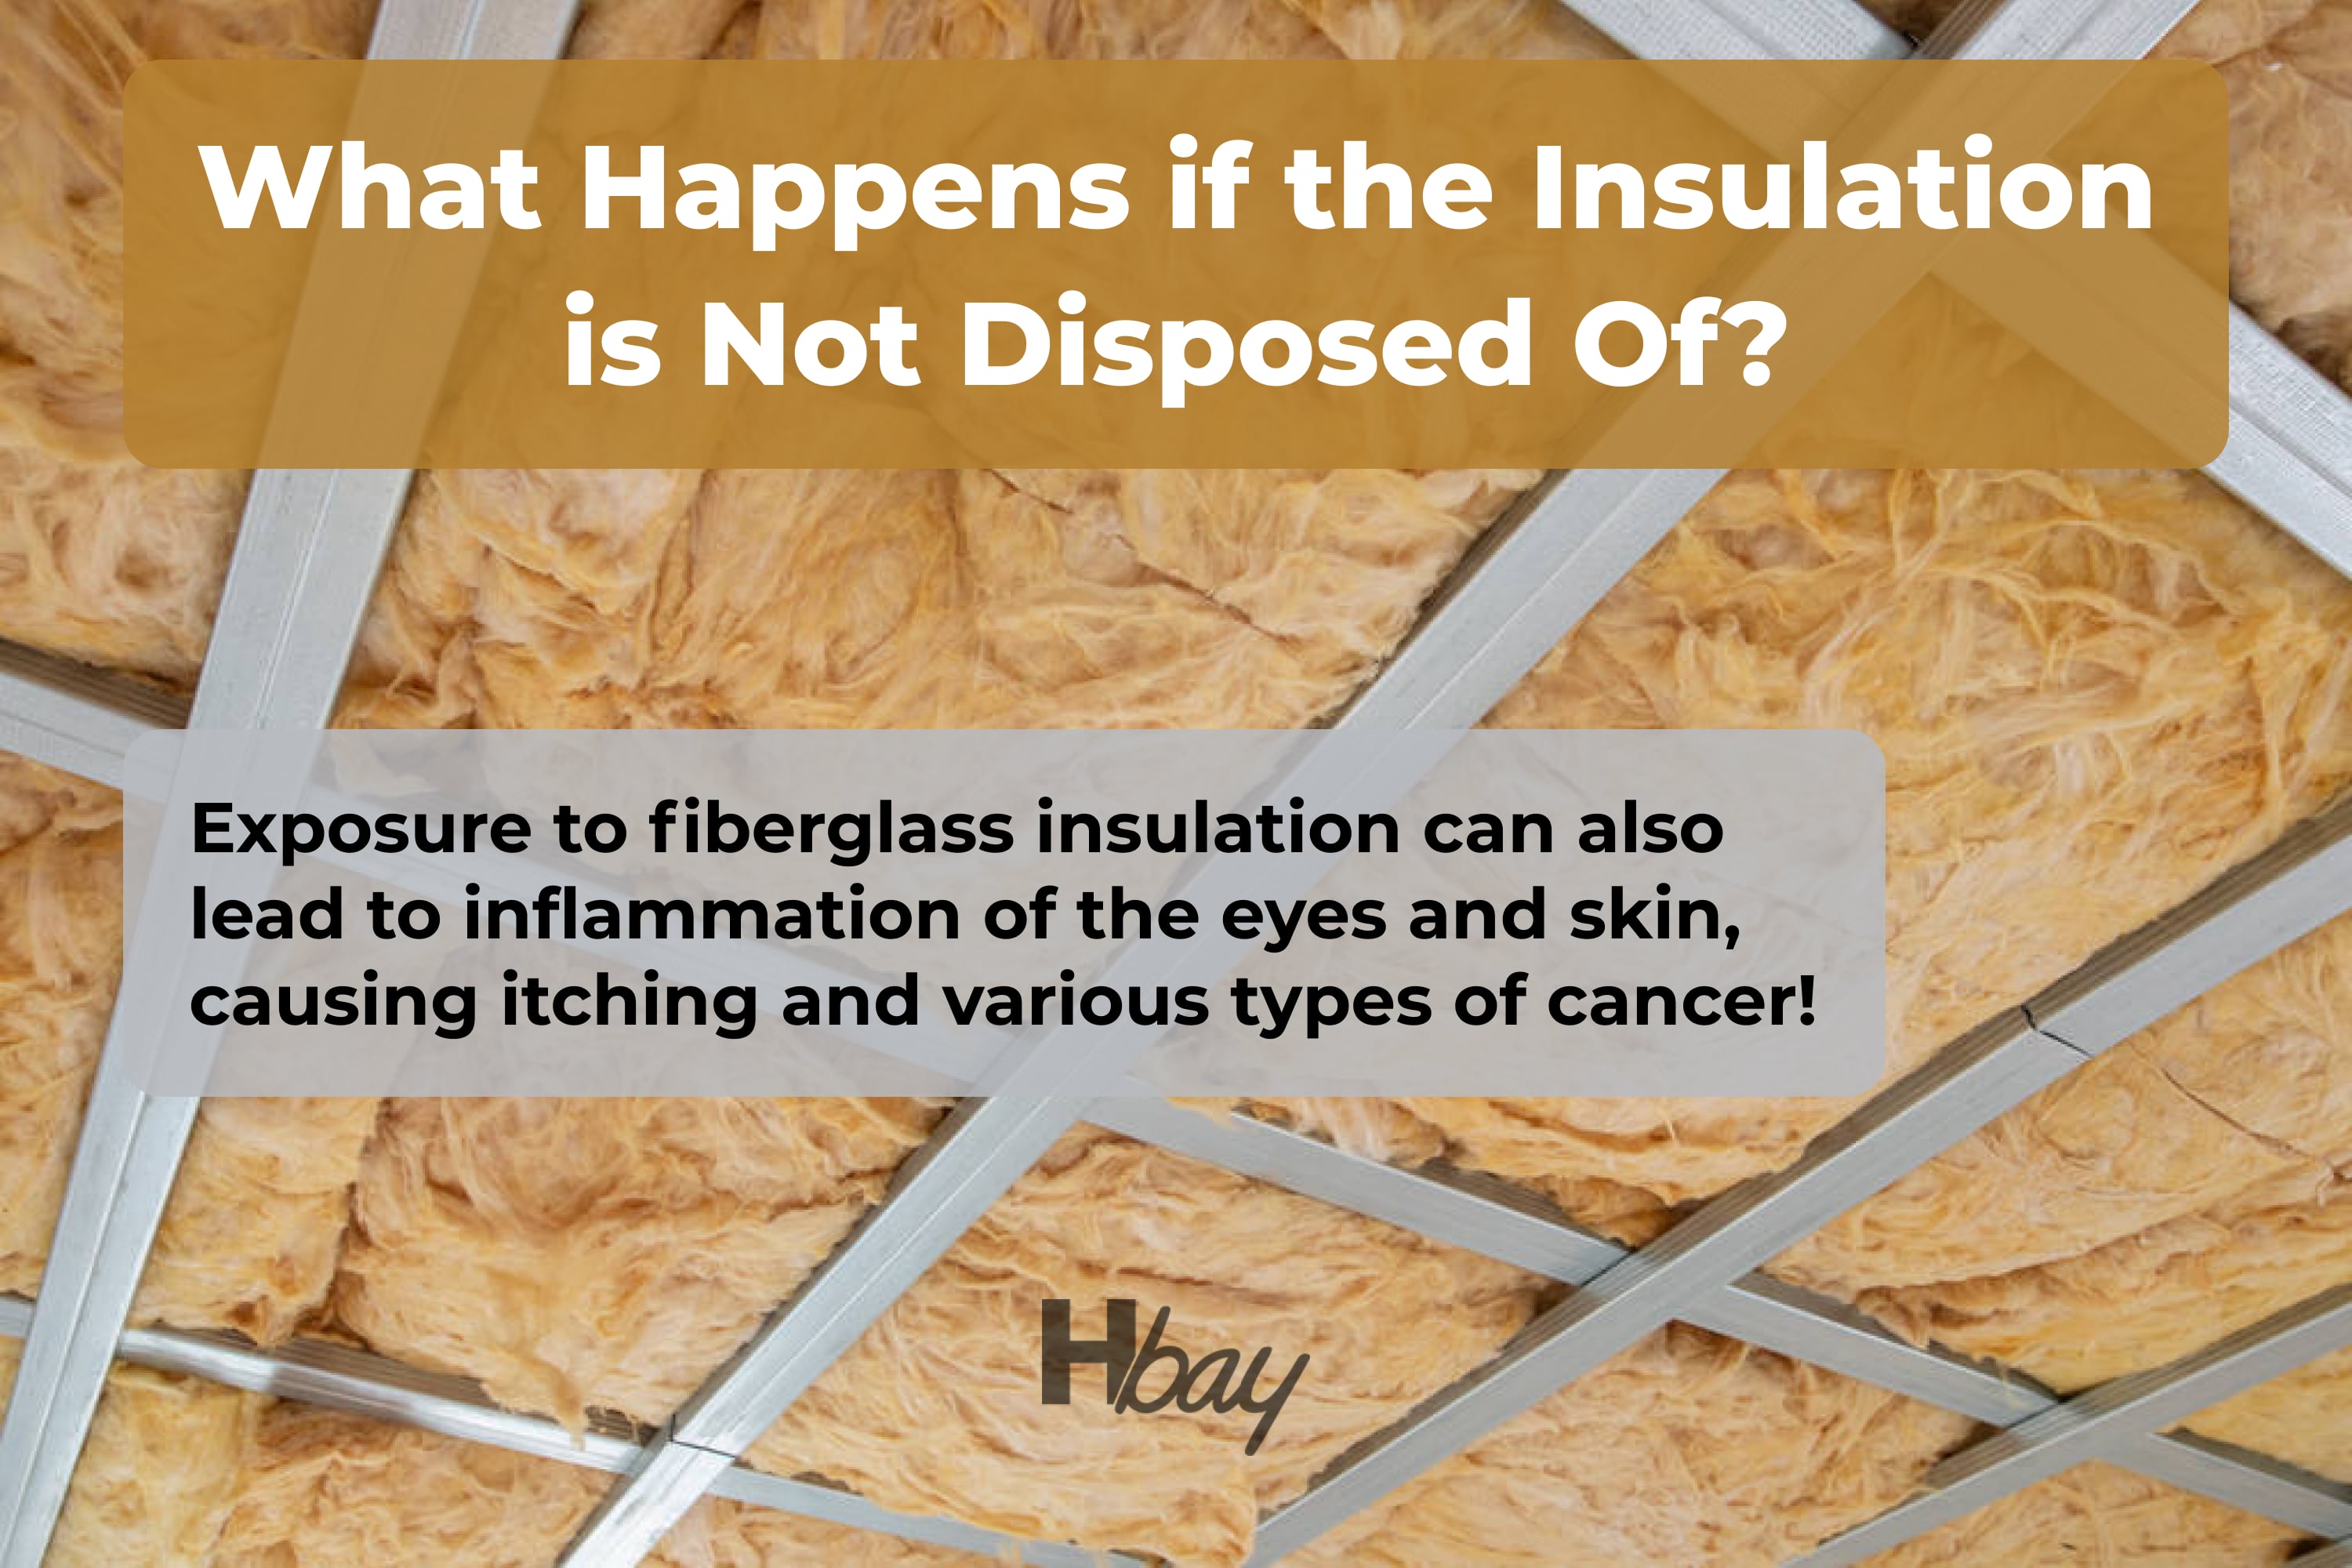 What happens if the insulation is not disposed of